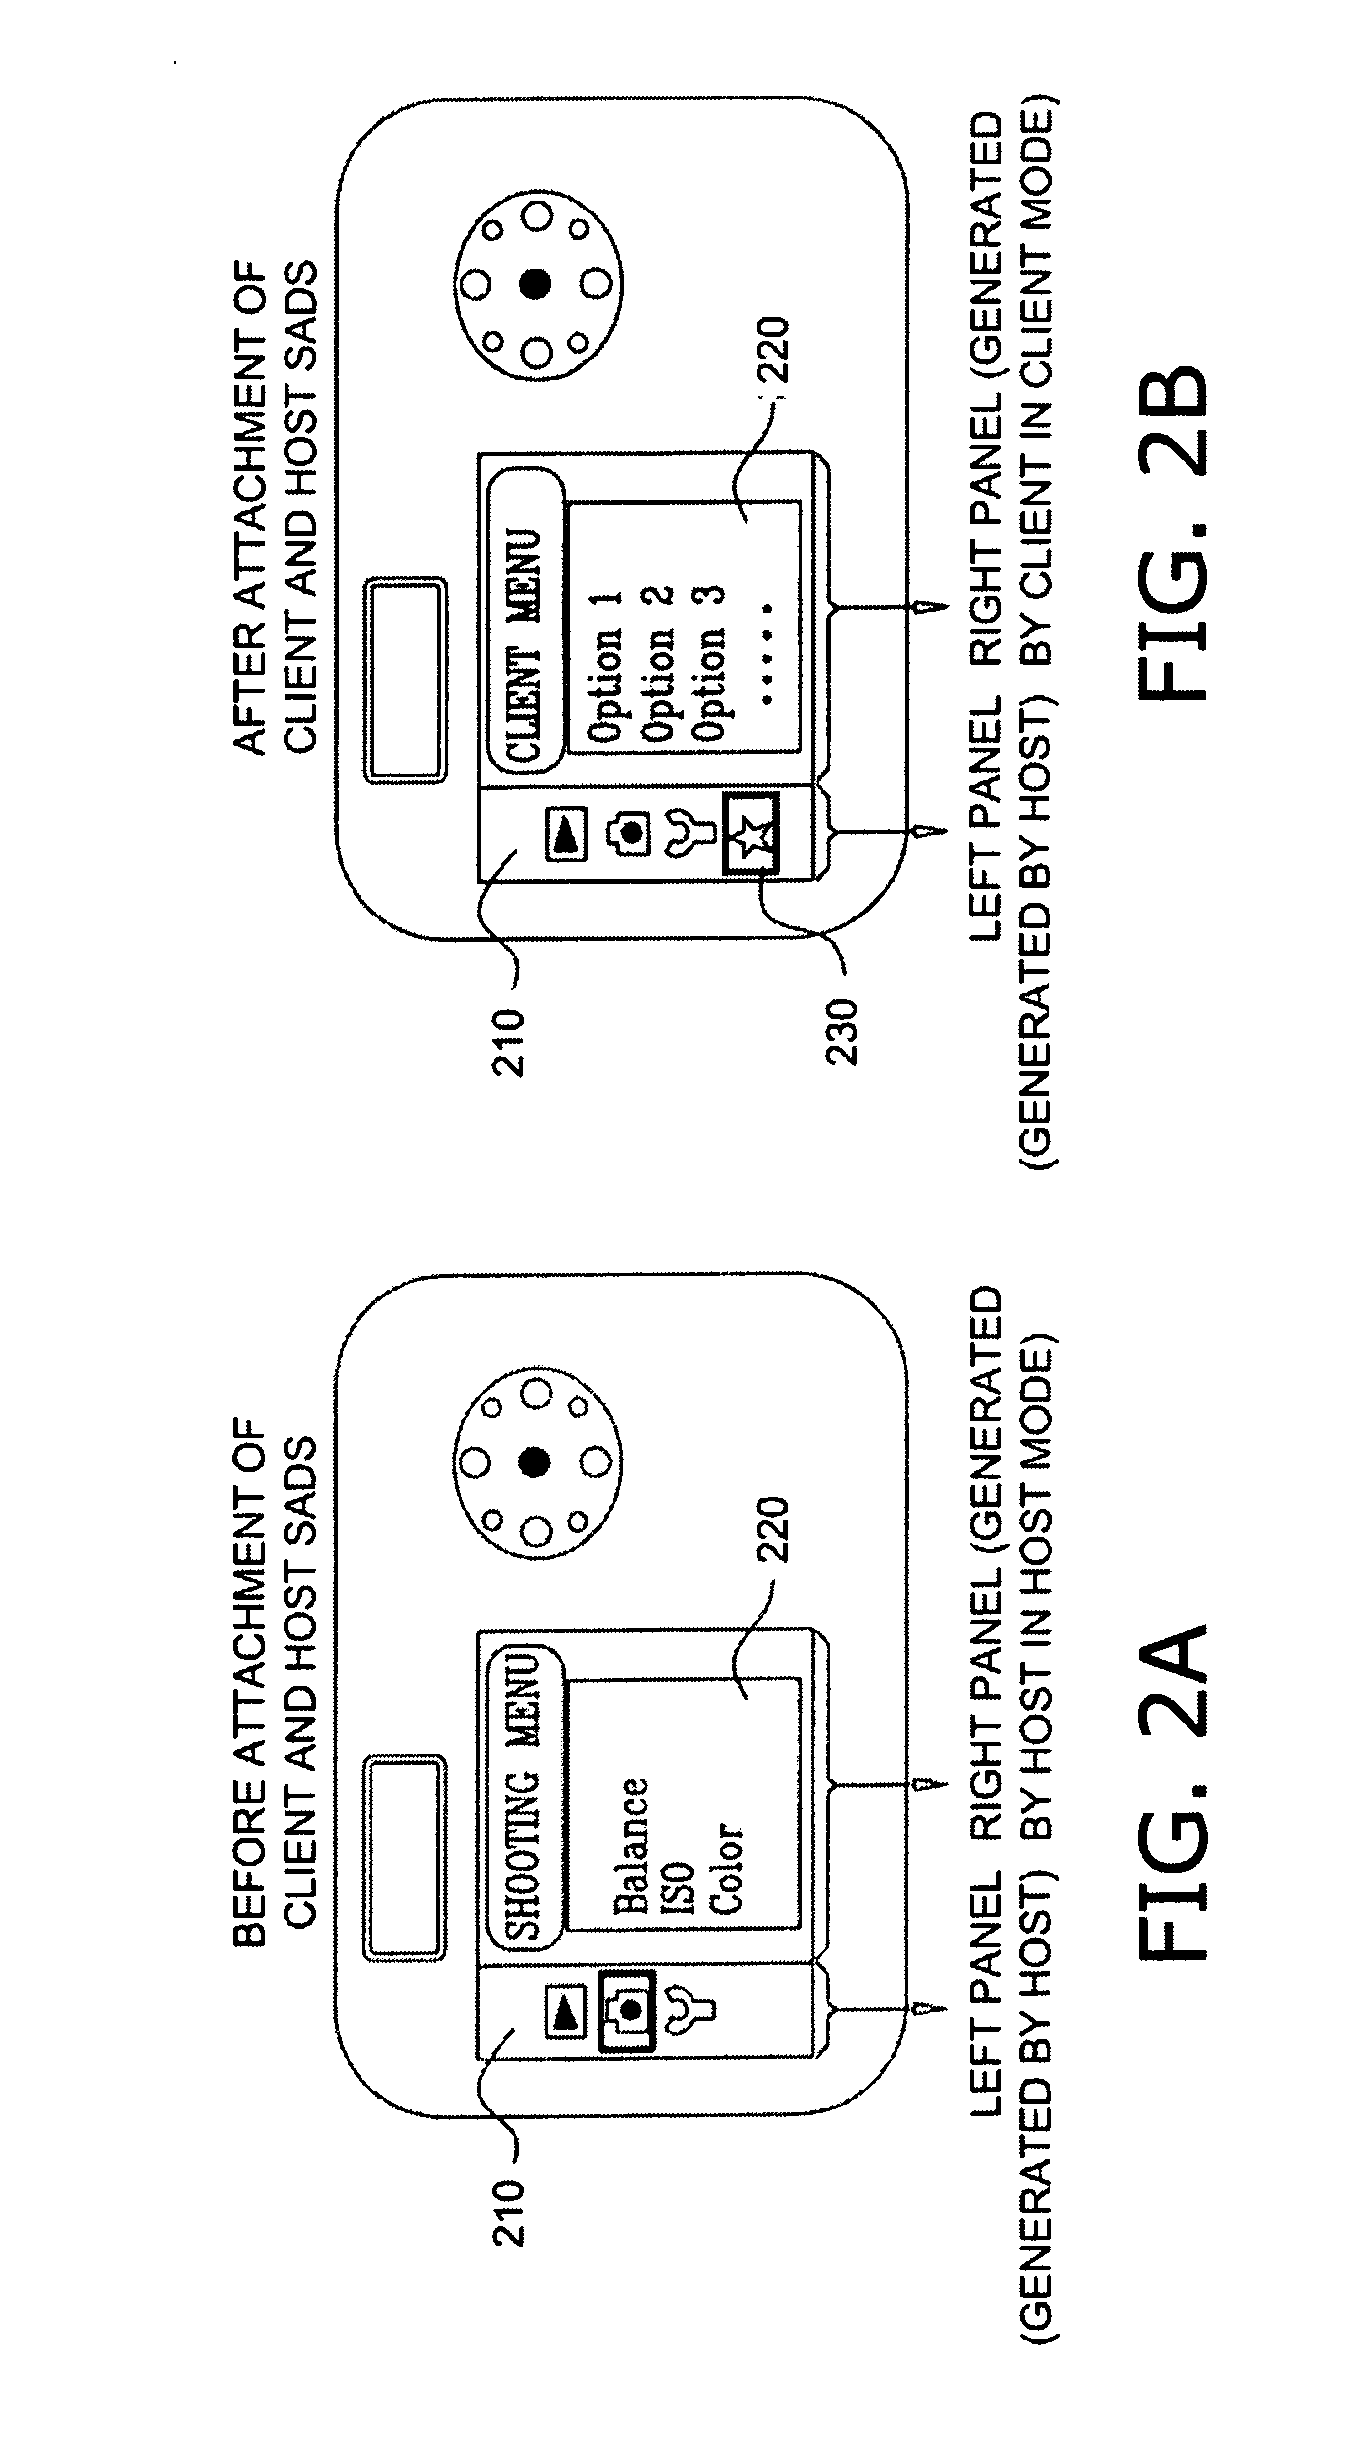 Adaptive user interface for multi-source systems